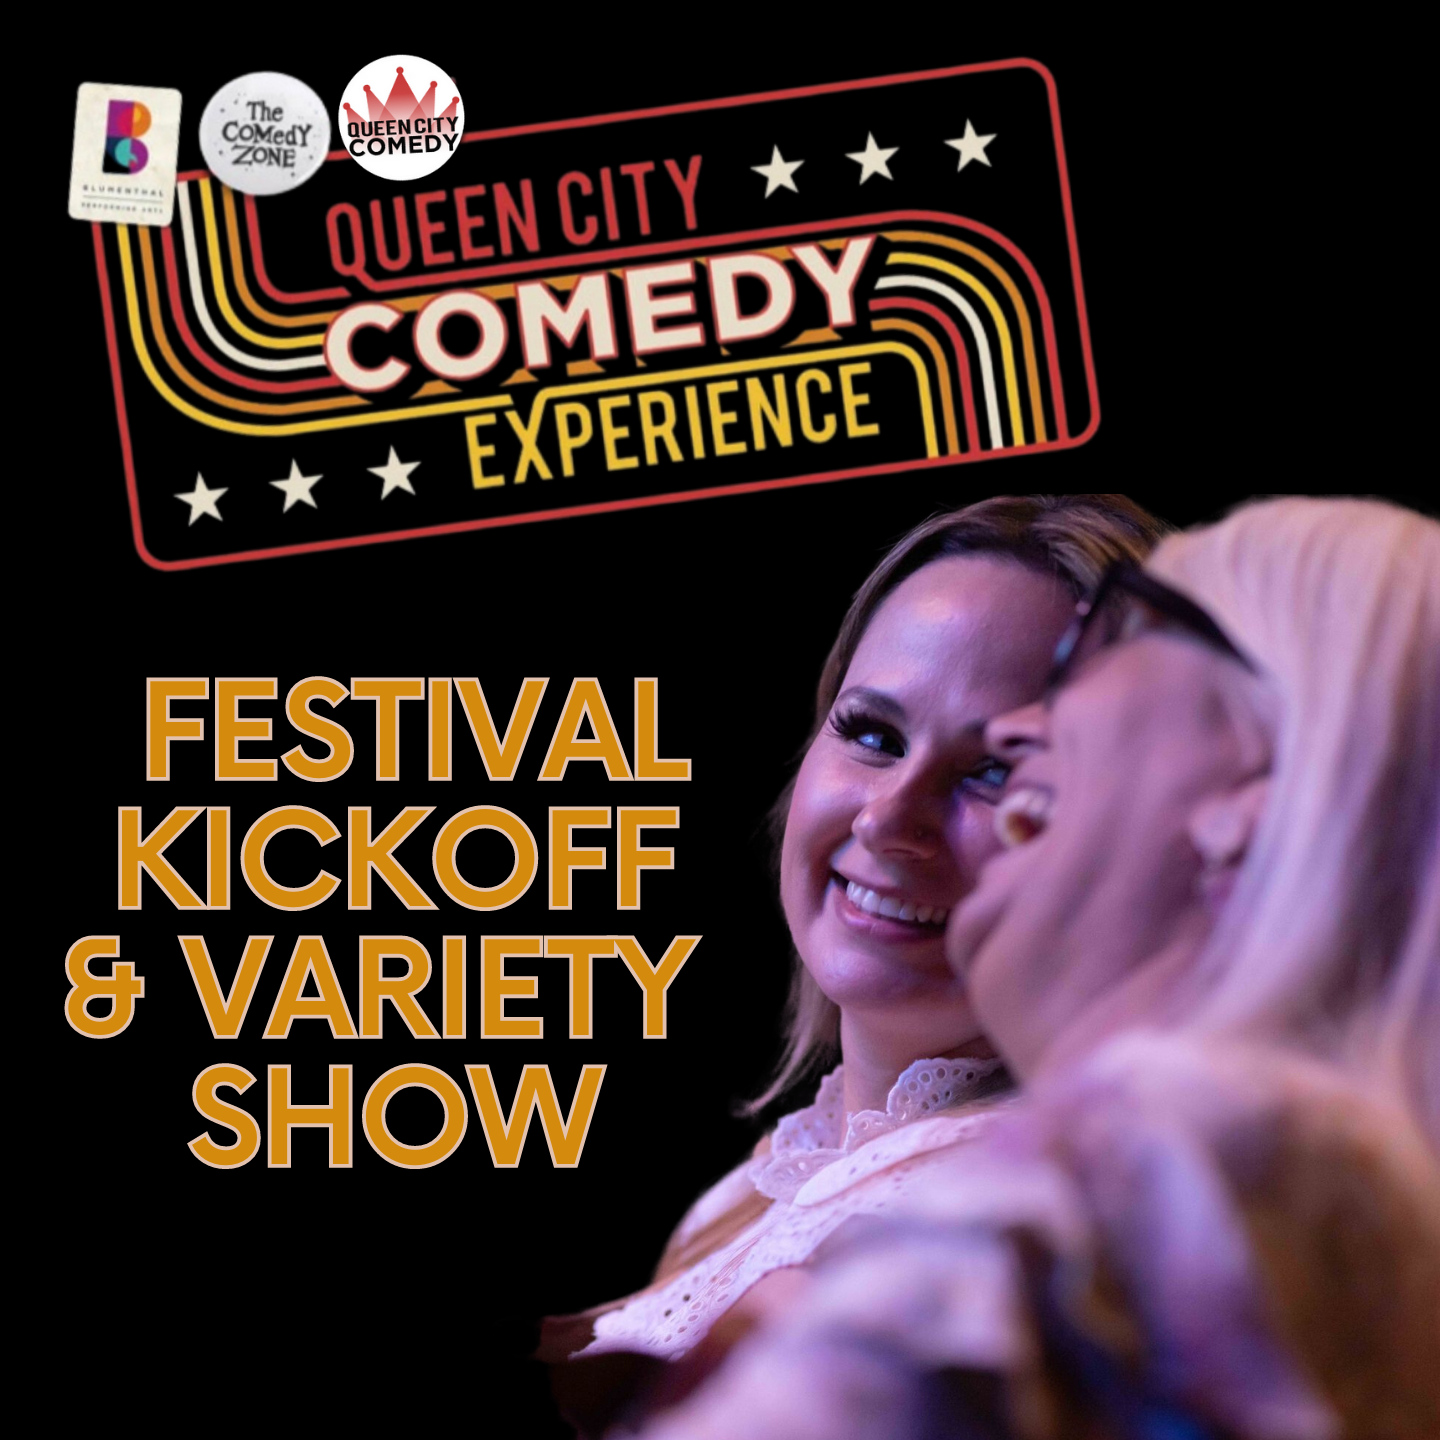 Queen City Comedy Variety Show & Festival Kickoff